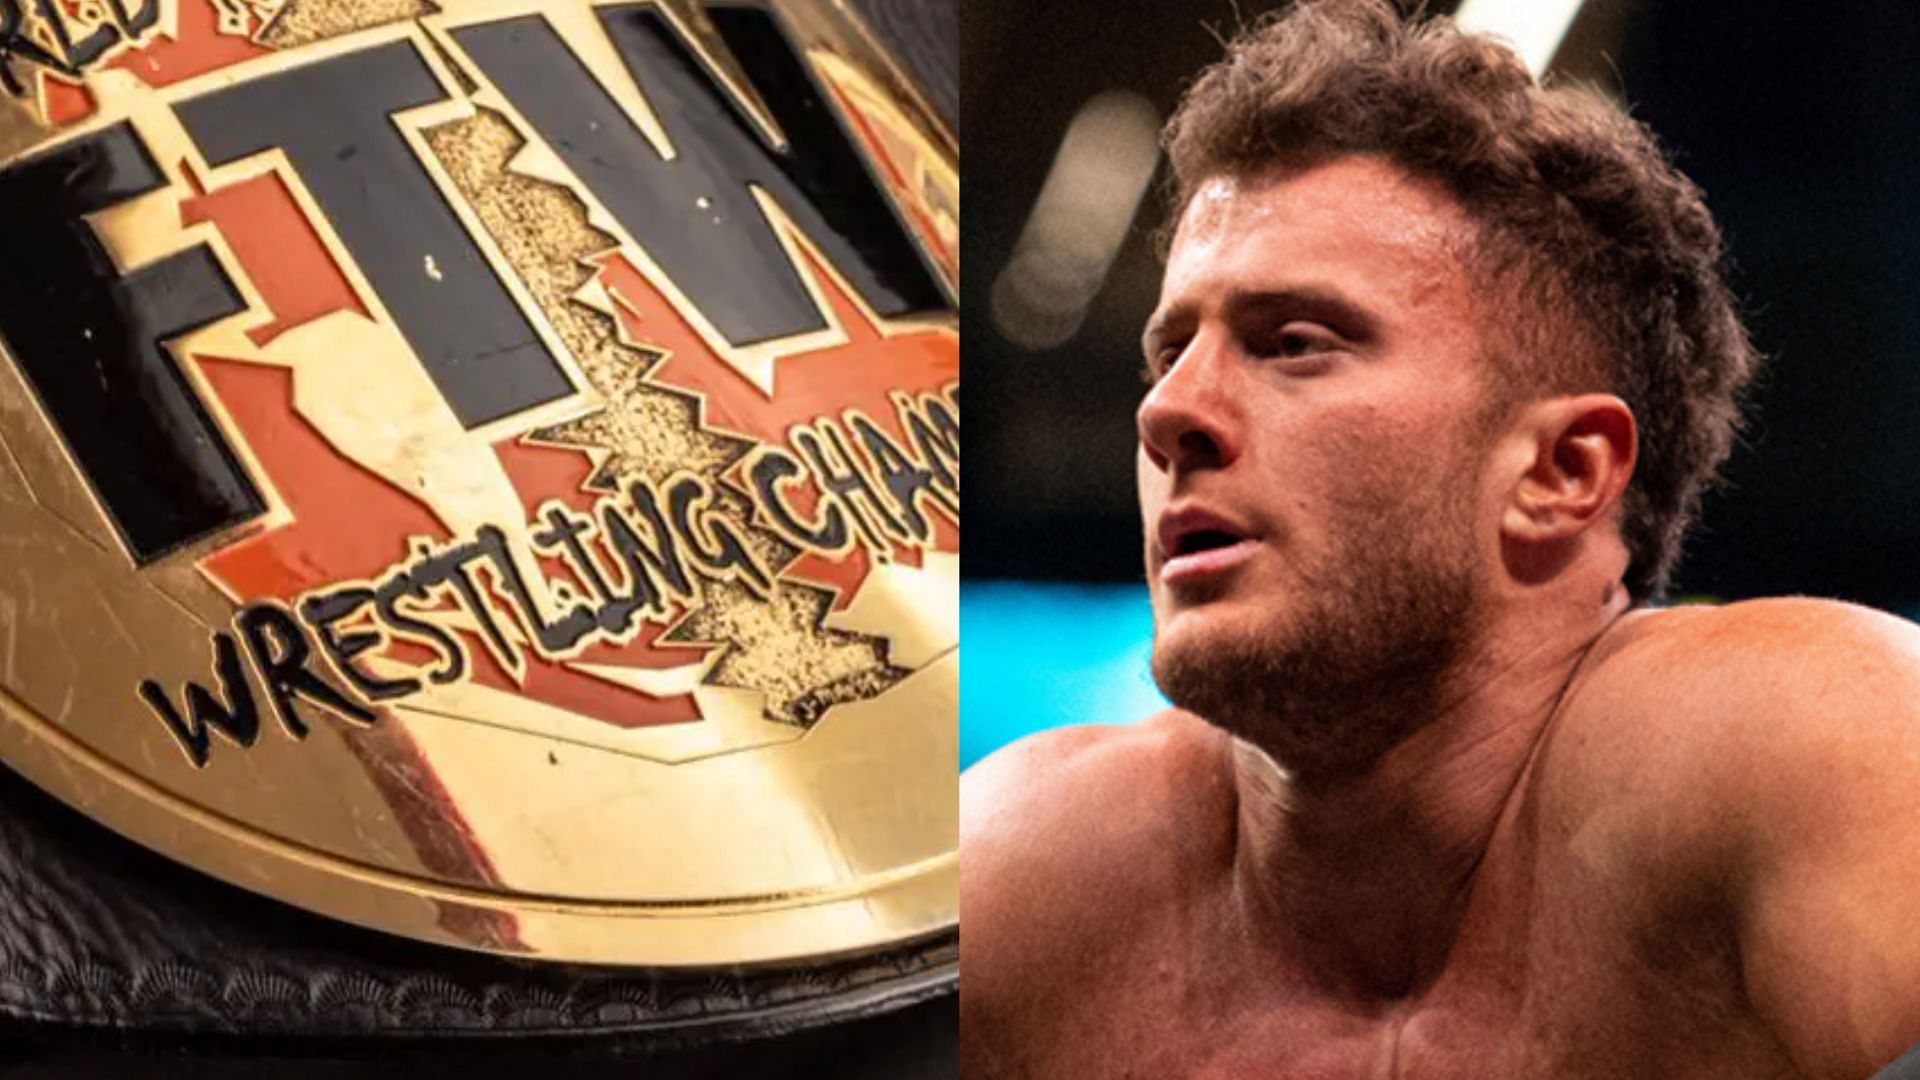 Which former FTW Champion wants to challenge MJF?